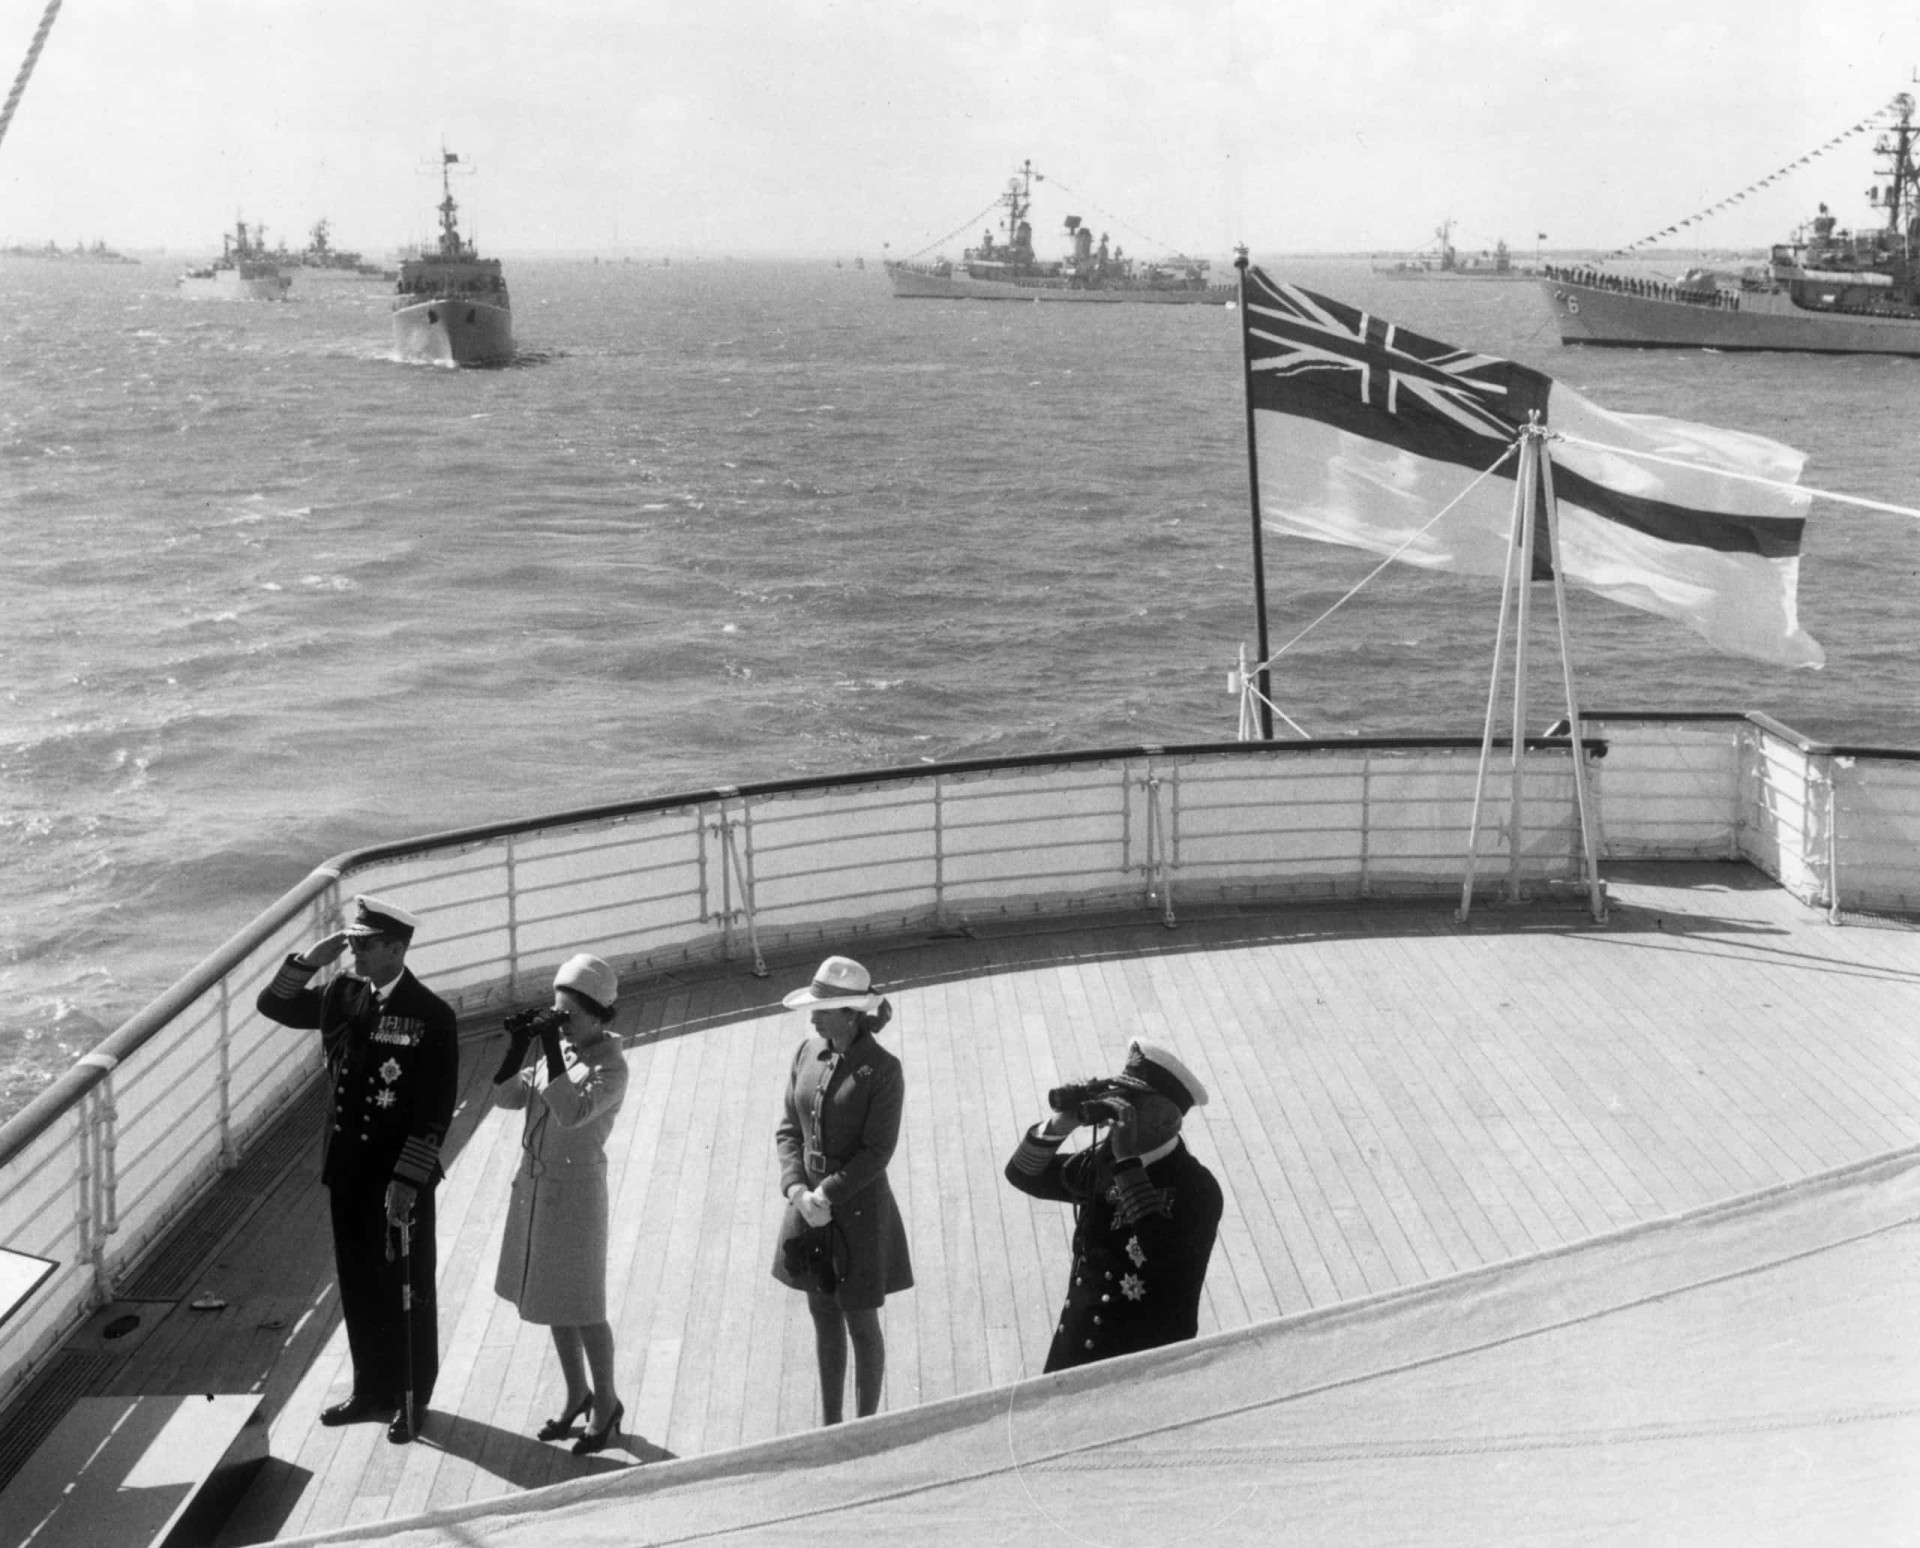 <p>Prince Philip, Queen Elizabeth II, Princess Anne, and Earl Mountbatten on board the Britannia at Spithead on the south coast of England during the Queen's review of the 62 ships of the North Atlantic Treaty Organization (NATO) fleet. This ceremony formed part of NATO's 20th-anniversary celebrations. </p><p><a href="https://www.msn.com/en-us/community/channel/vid-7xx8mnucu55yw63we9va2gwr7uihbxwc68fxqp25x6tg4ftibpra?cvid=94631541bc0f4f89bfd59158d696ad7e">Follow us and access great exclusive content every day</a></p>